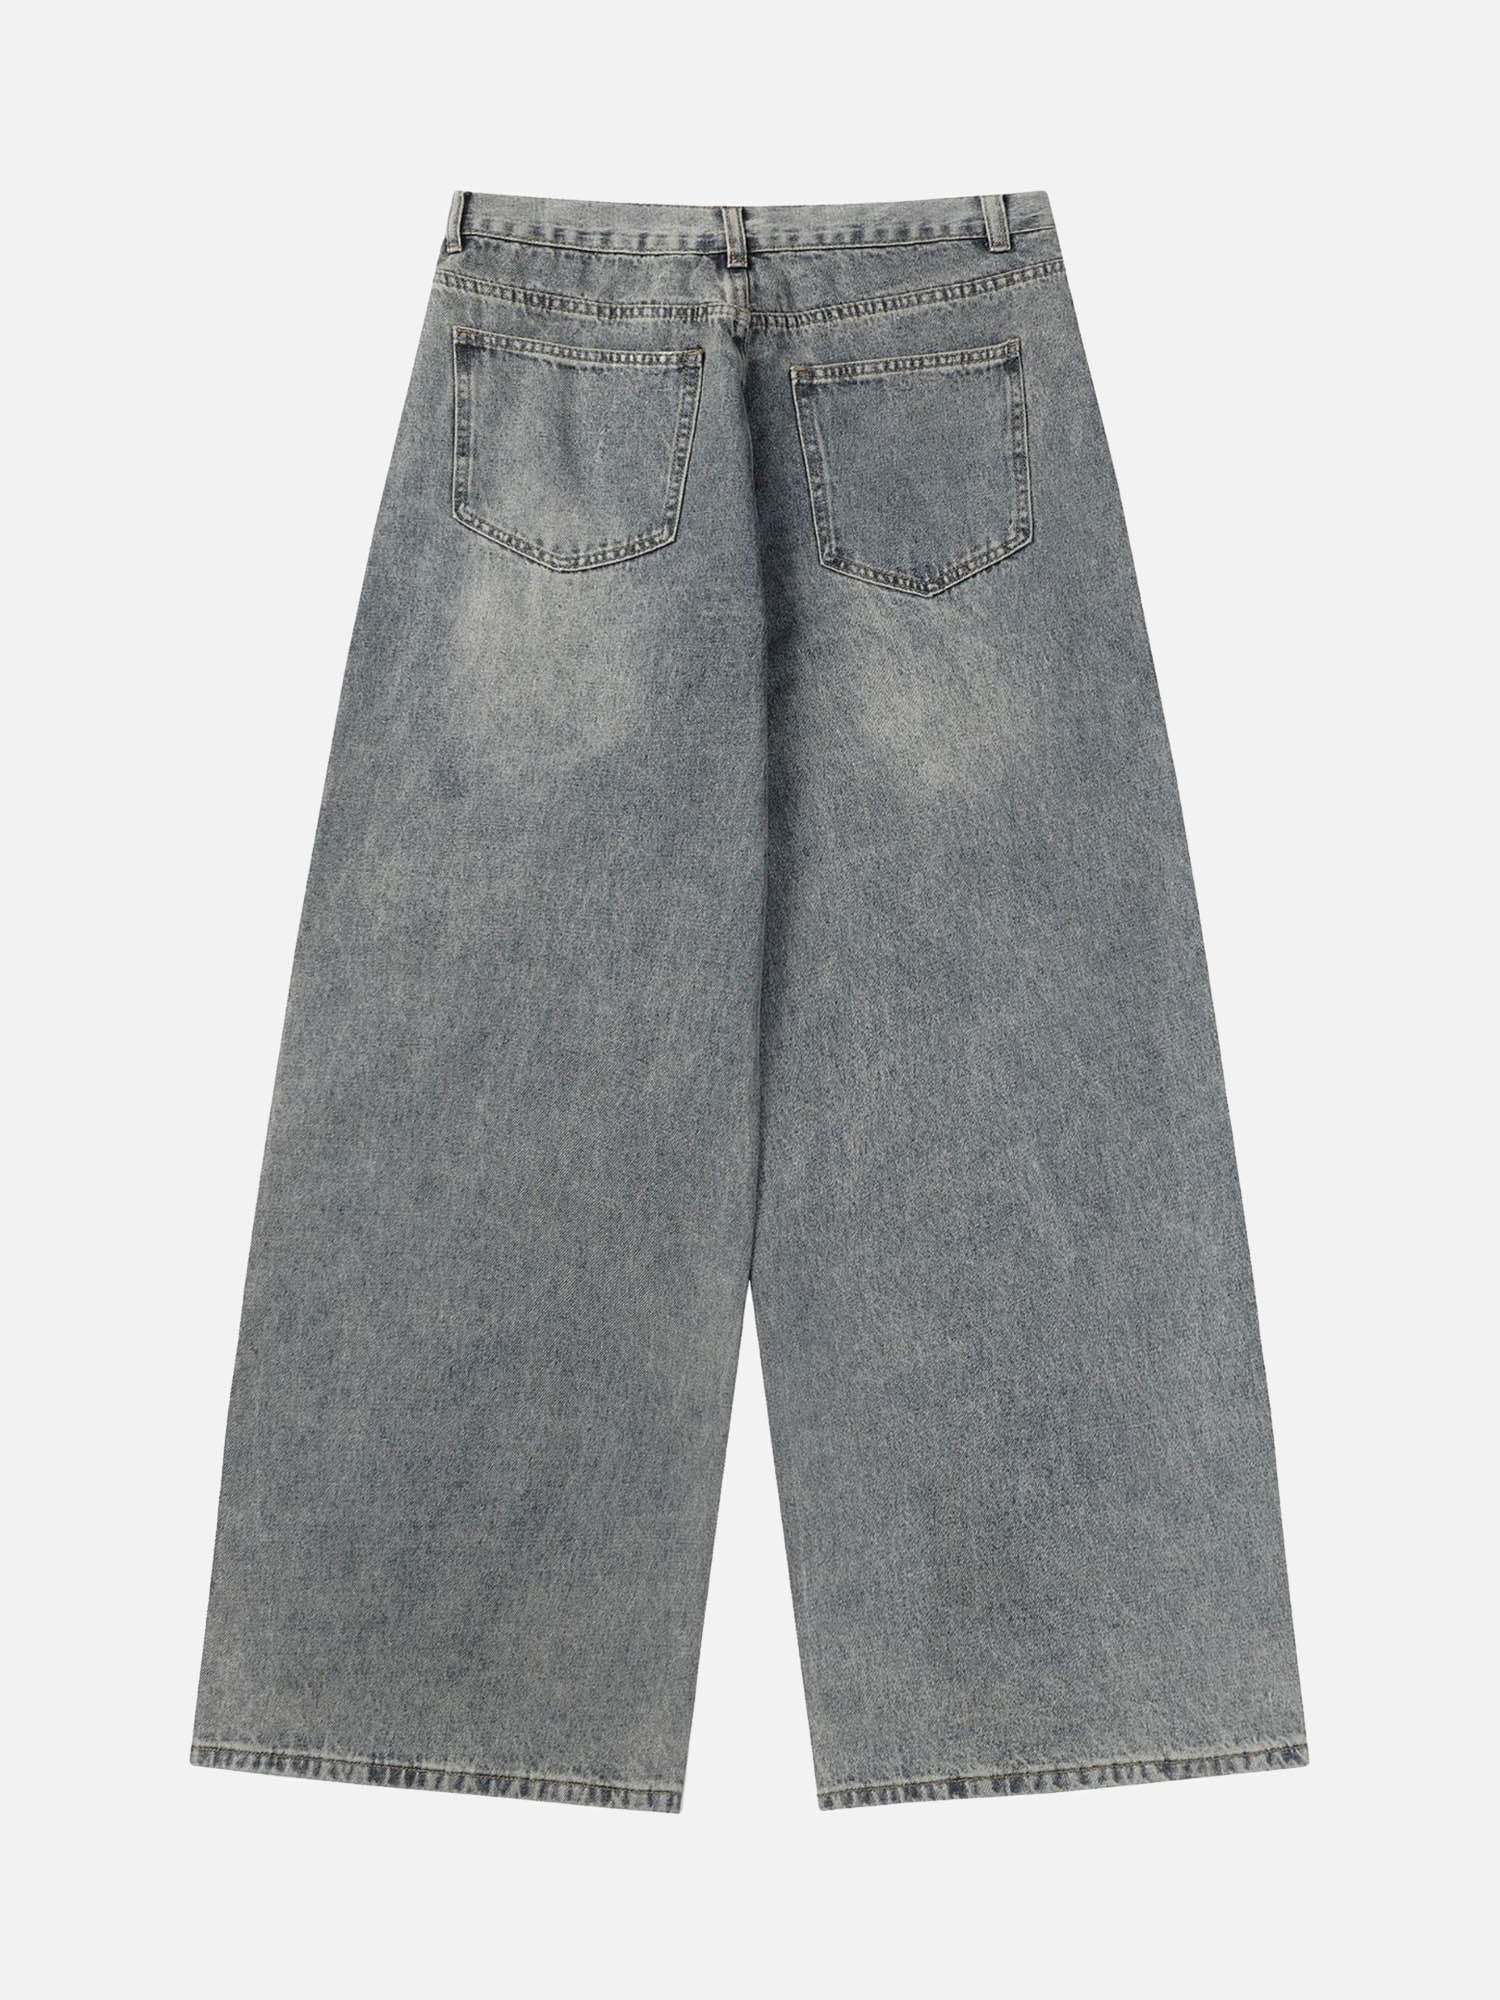 American Street Fashion Washed Jeans